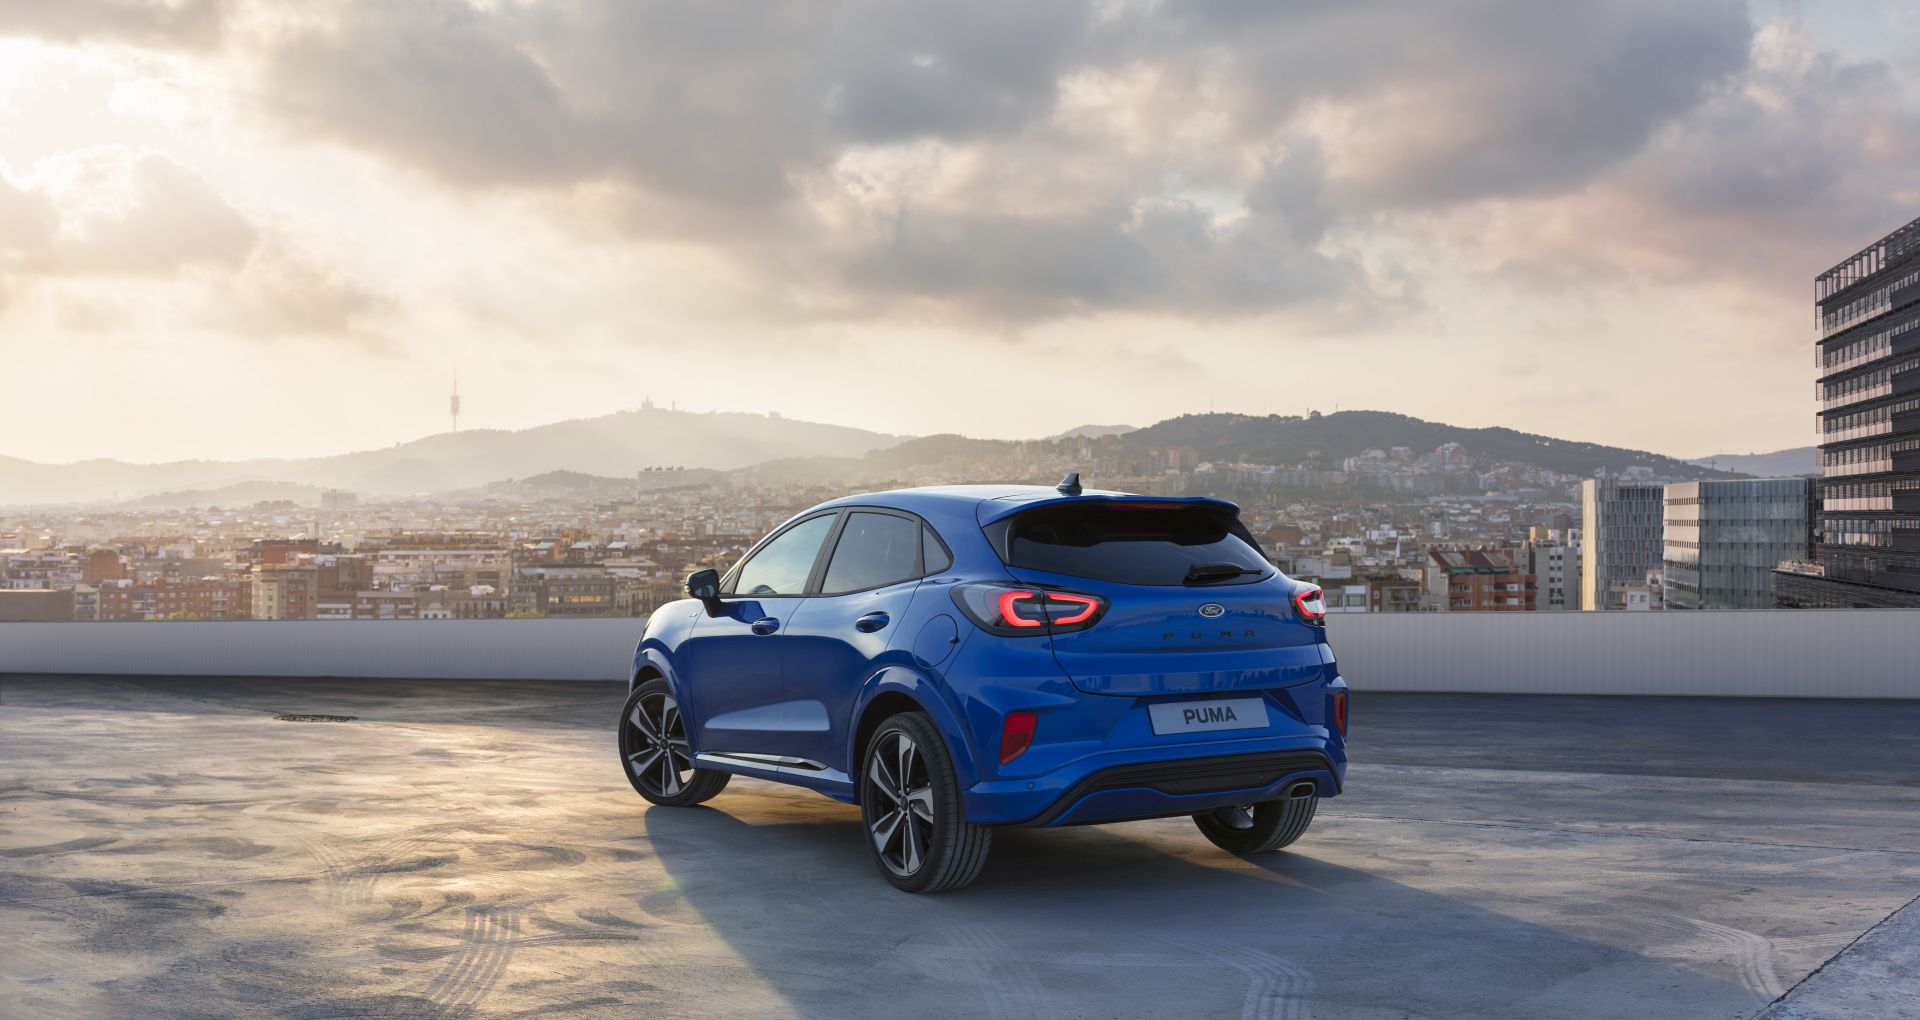 2020 Ford Puma Configurator Goes Live, New Priced At EUR 23,150 - autoevolution